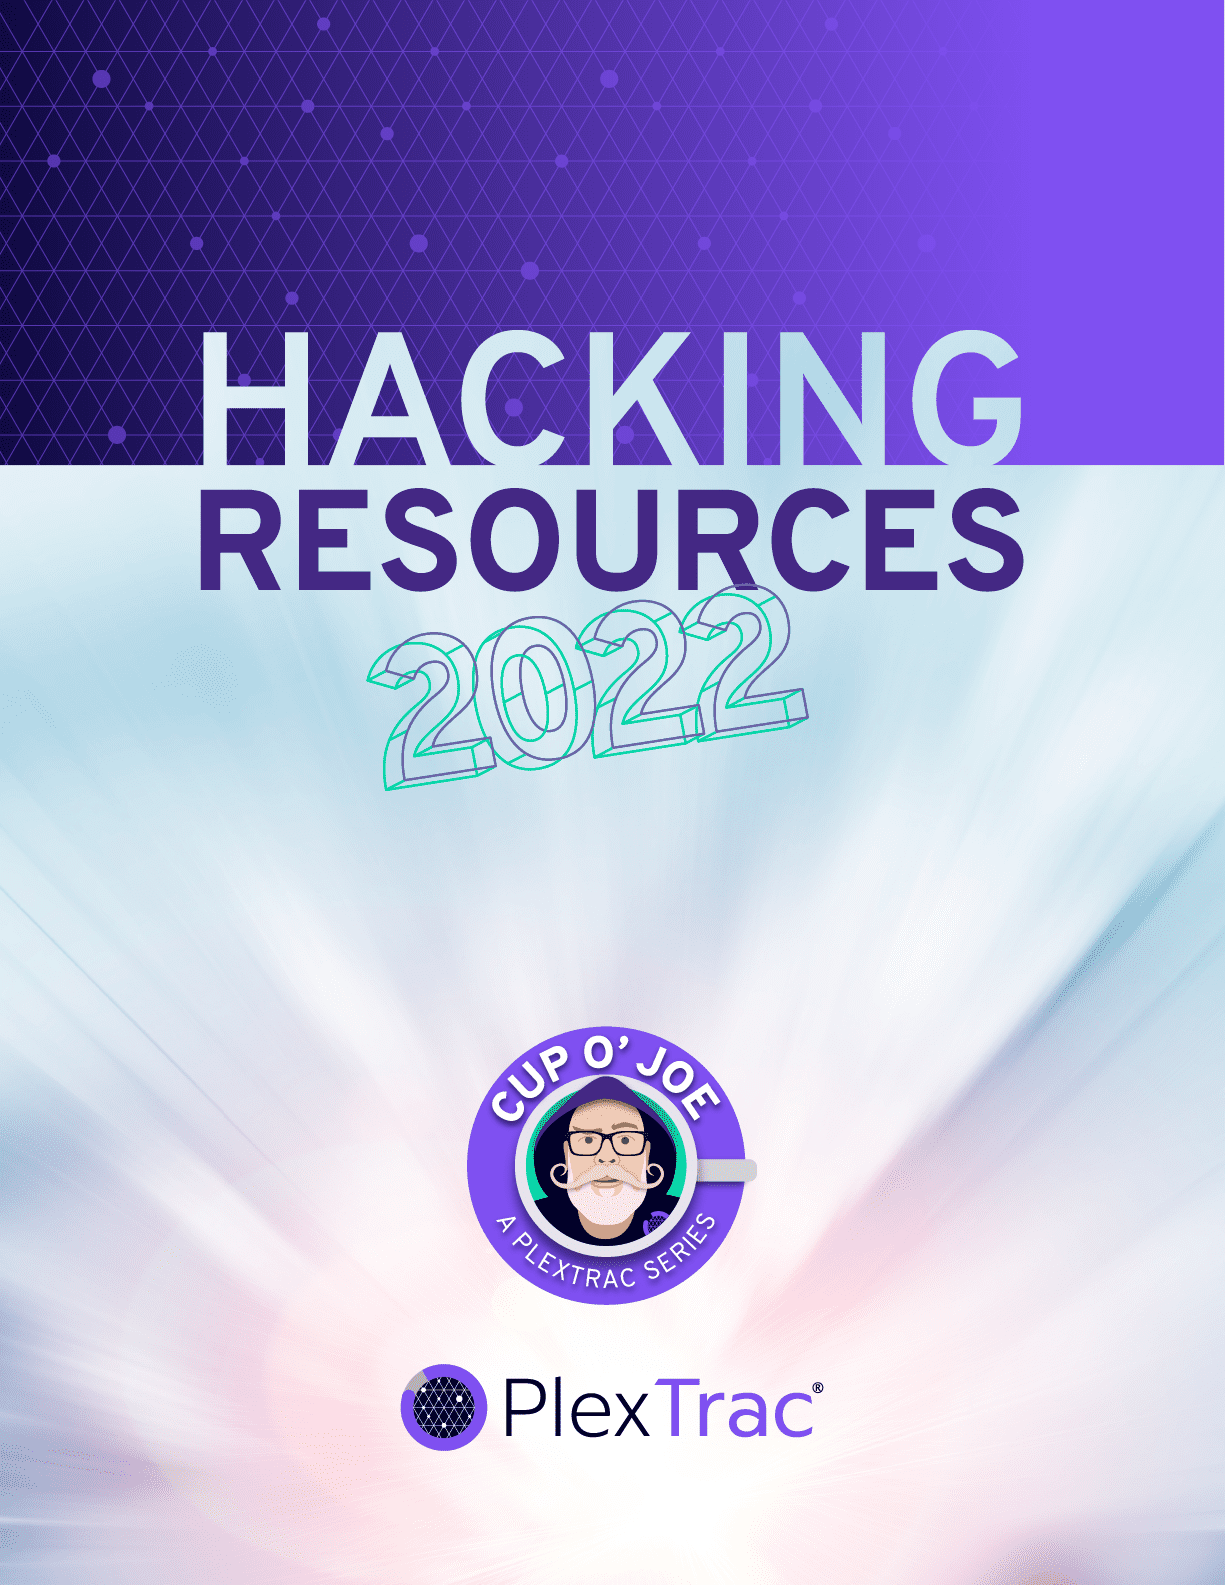 2022 Hacking Resources cover art